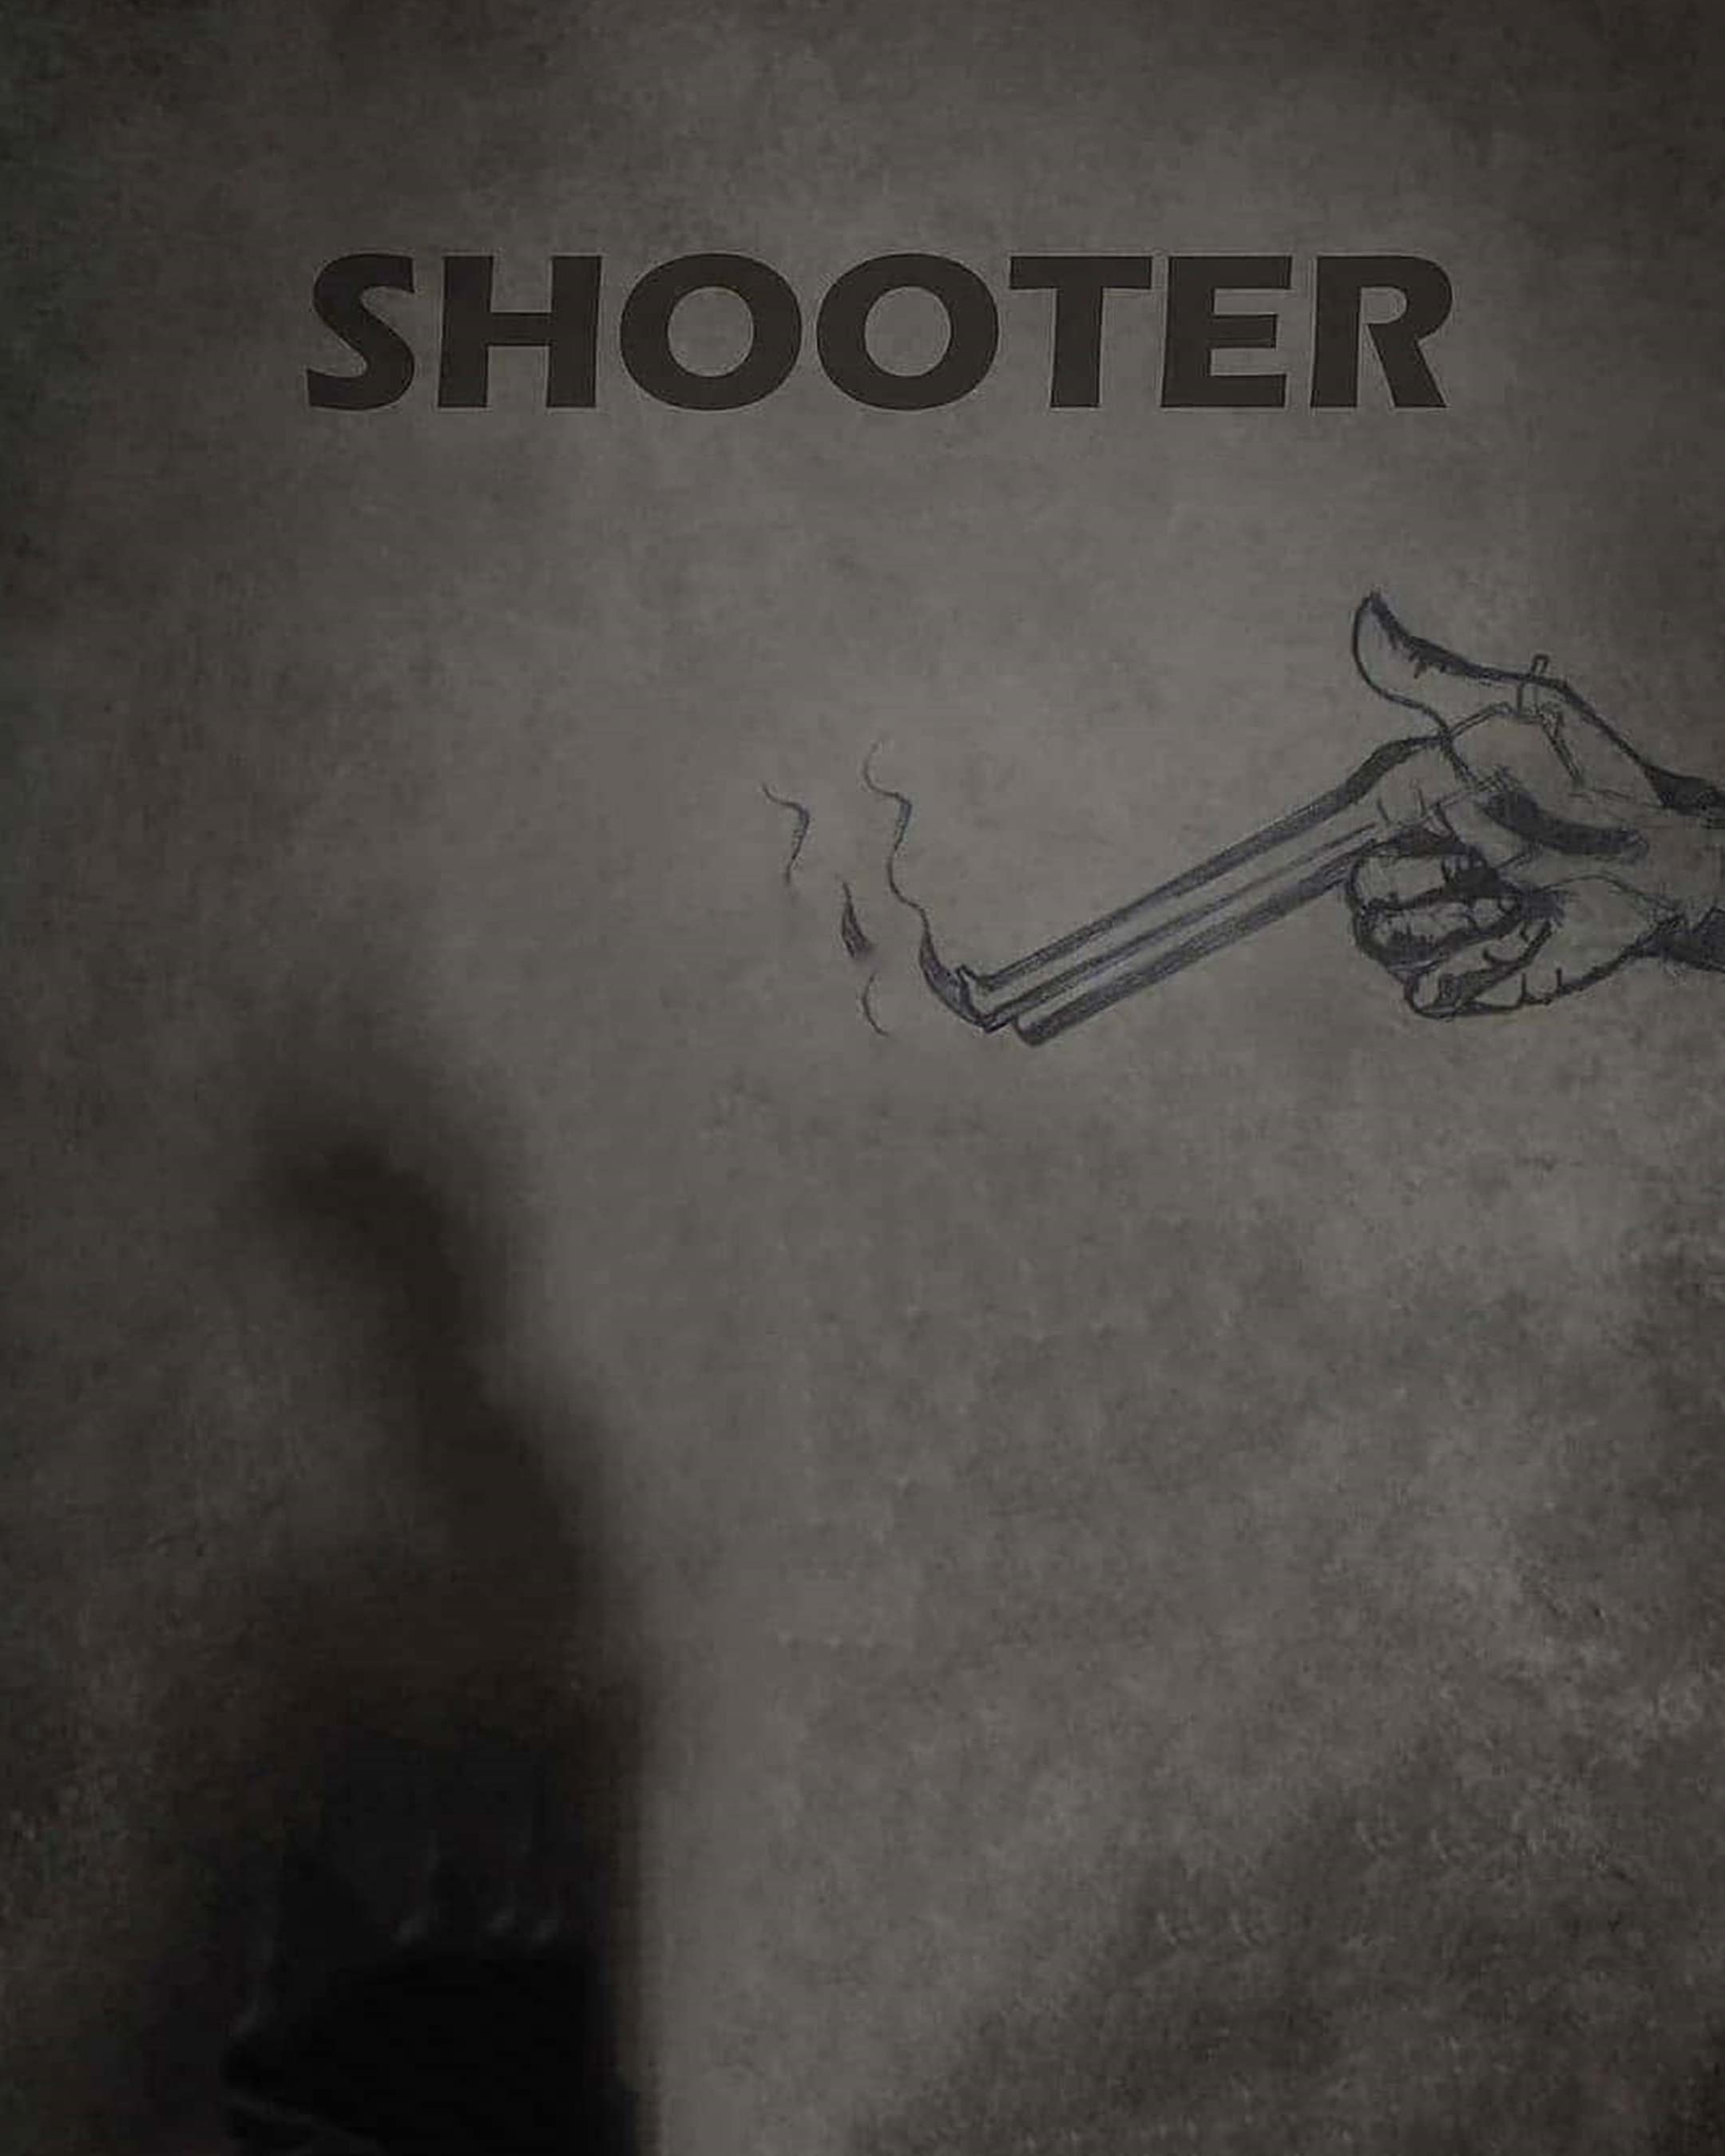 Shooter Wall PicsArt Background Free Stock Image